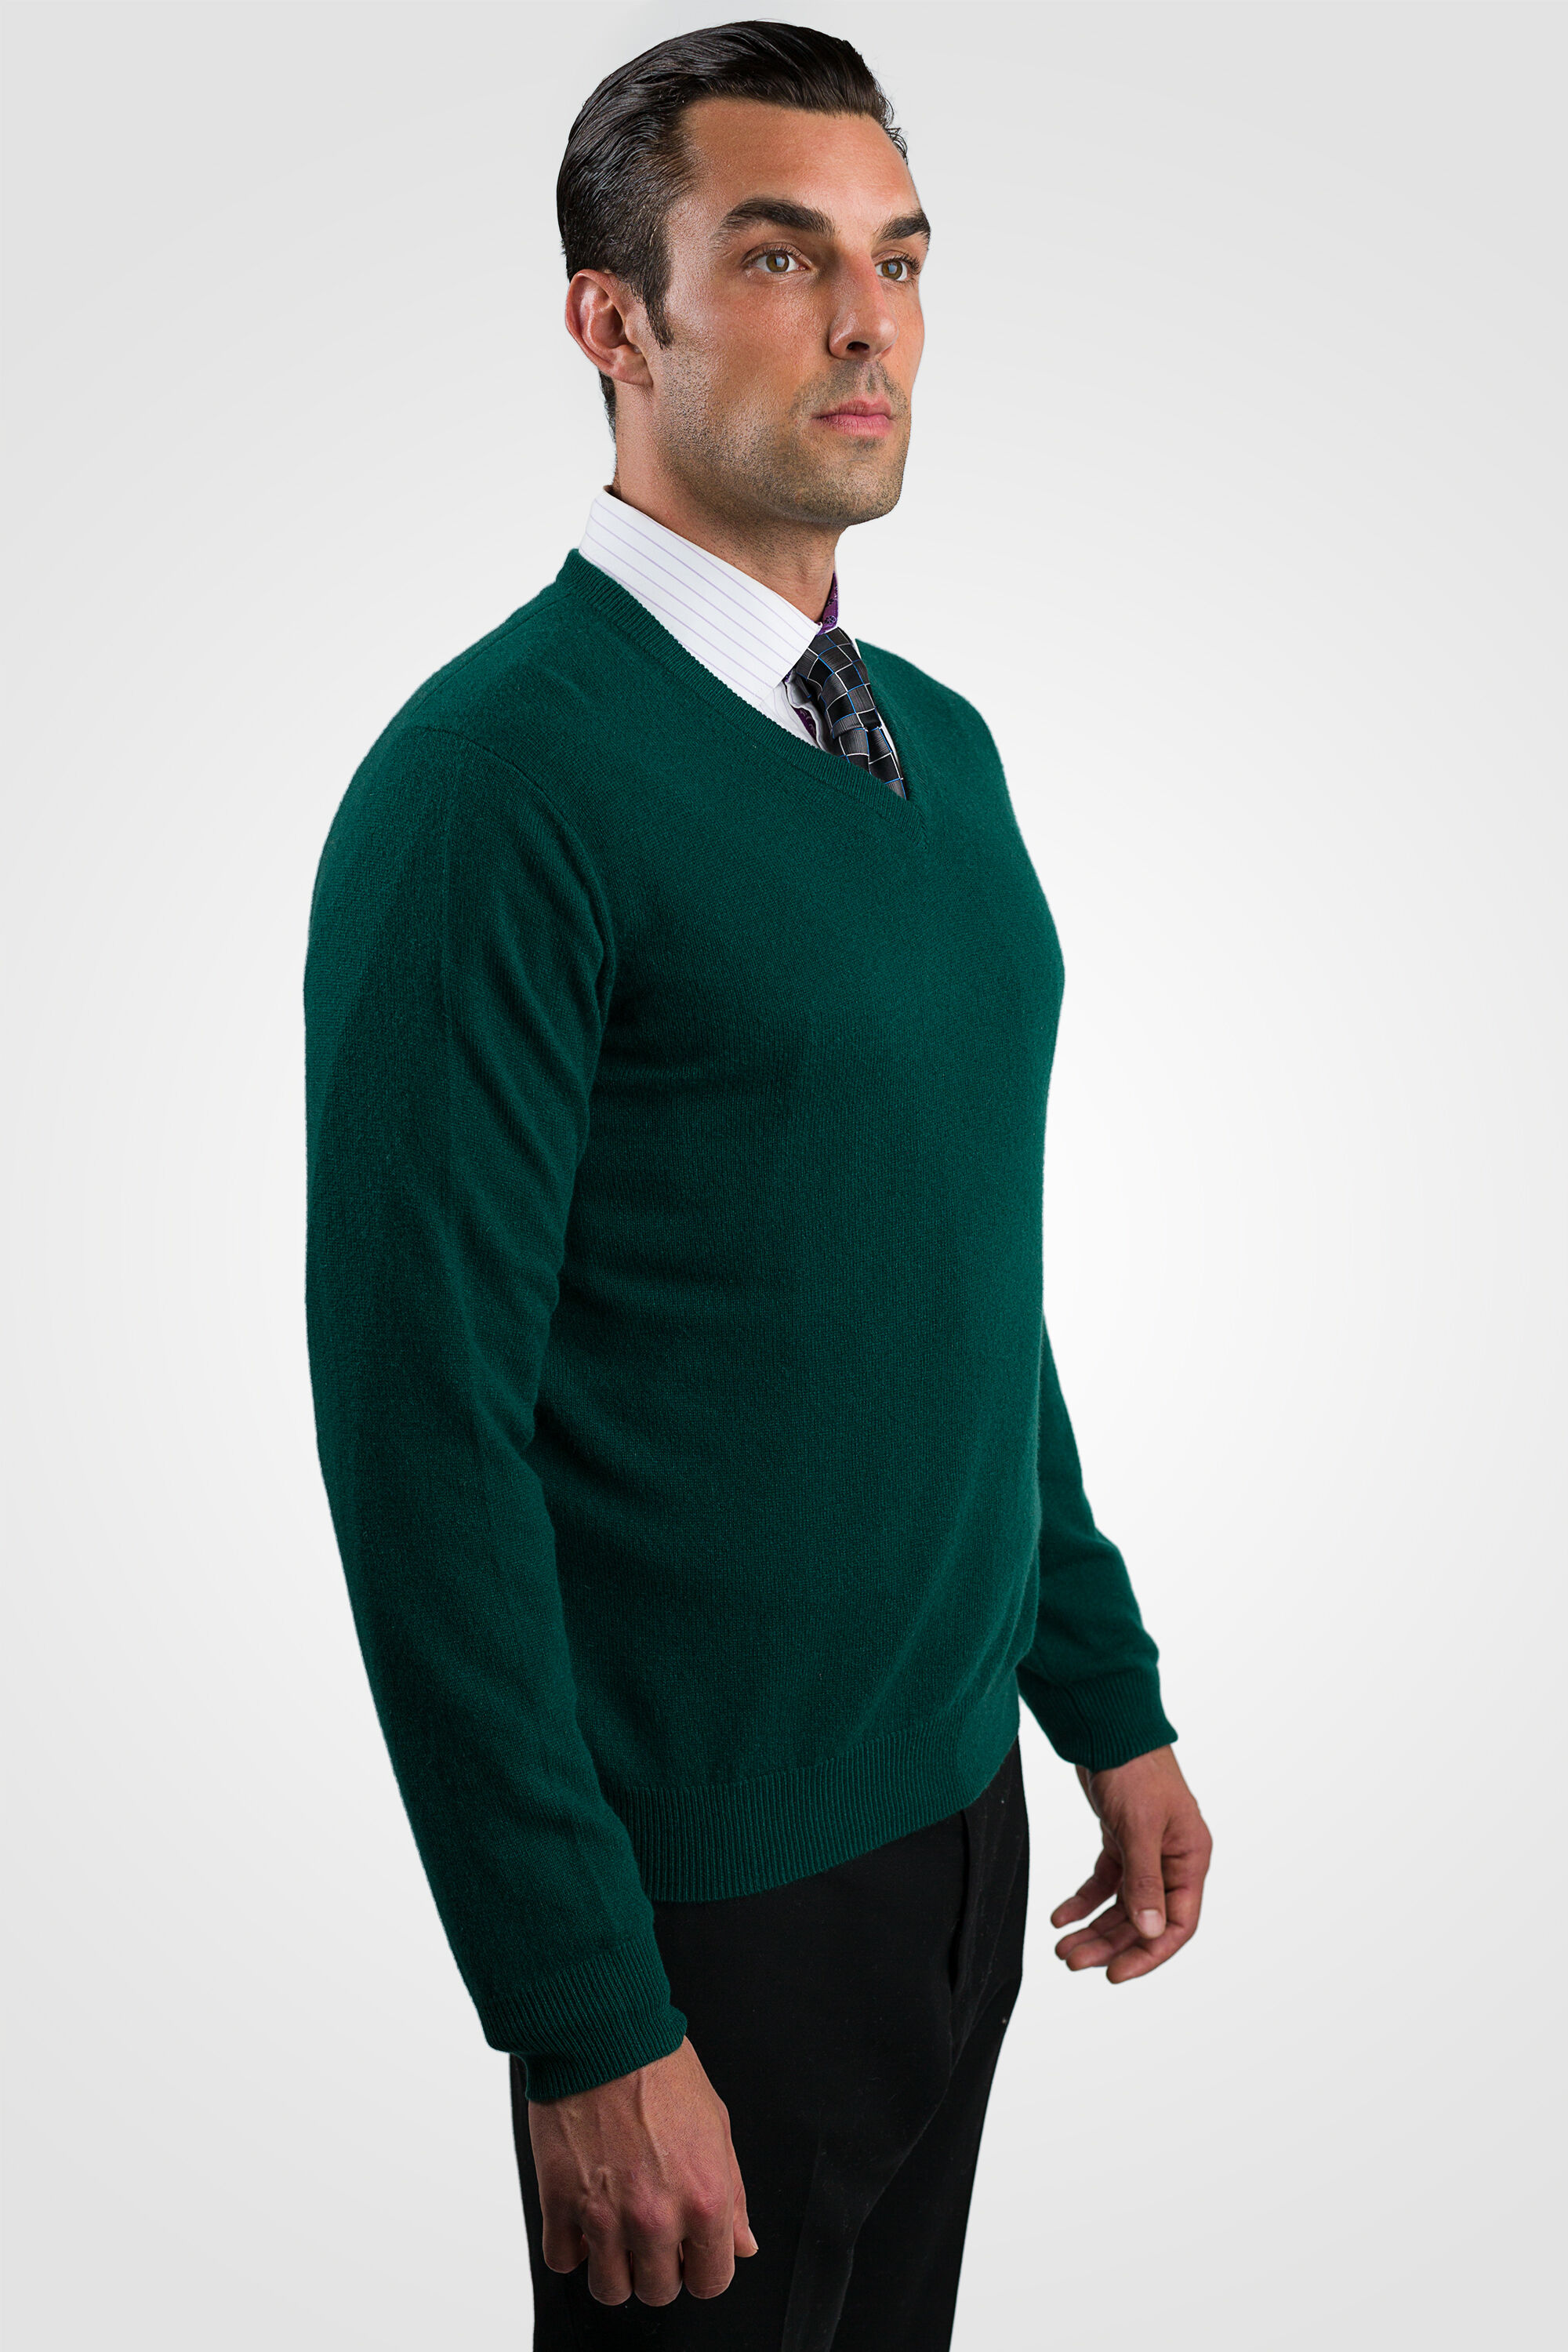 for Men Malo Cashmere Jumper in Military Green Green Mens Clothing Sweaters and knitwear V-neck jumpers 